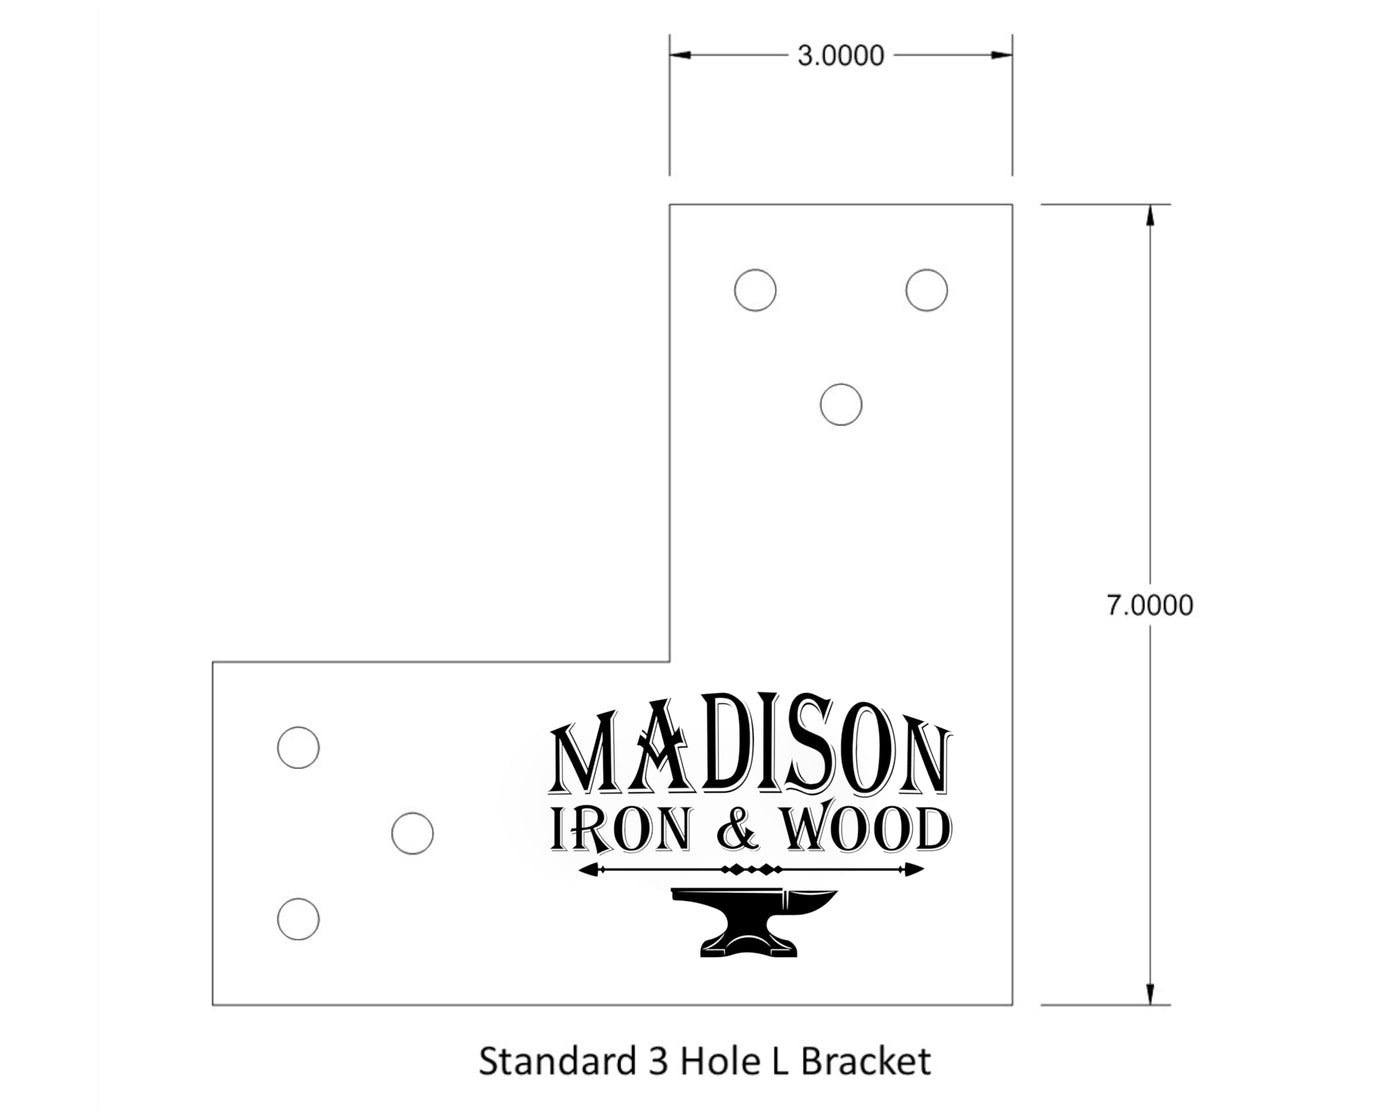 Standard Brackets for 4x4" Dimensional Wood Post - Madison Iron and Wood - Brackets - metal outdoor decor - Steel deocrations - american made products - veteran owned business products - fencing decorations - fencing supplies - custom wall decorations - personalized wall signs - steel - decorative post caps - steel post caps - metal post caps - brackets - structural brackets - home improvement - easter - easter decorations - easter gift - easter yard decor